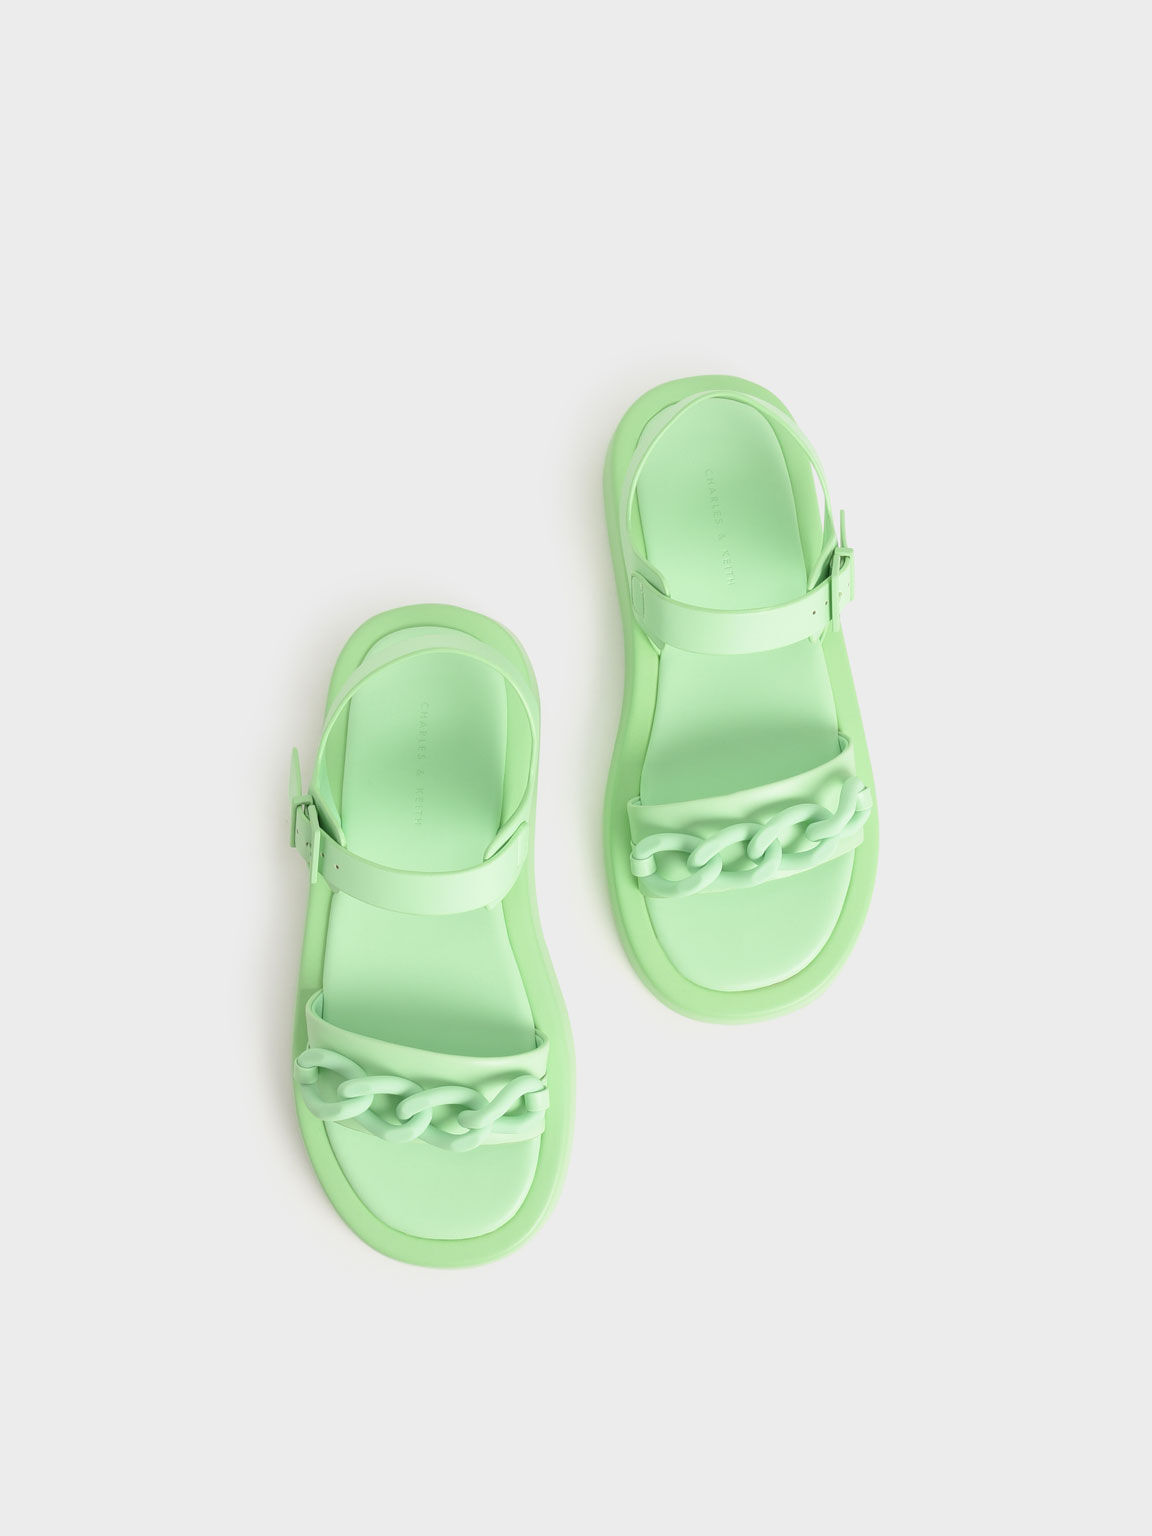 Sandal Ankle Strap Padded Chunky Chain-Link, Green, hi-res